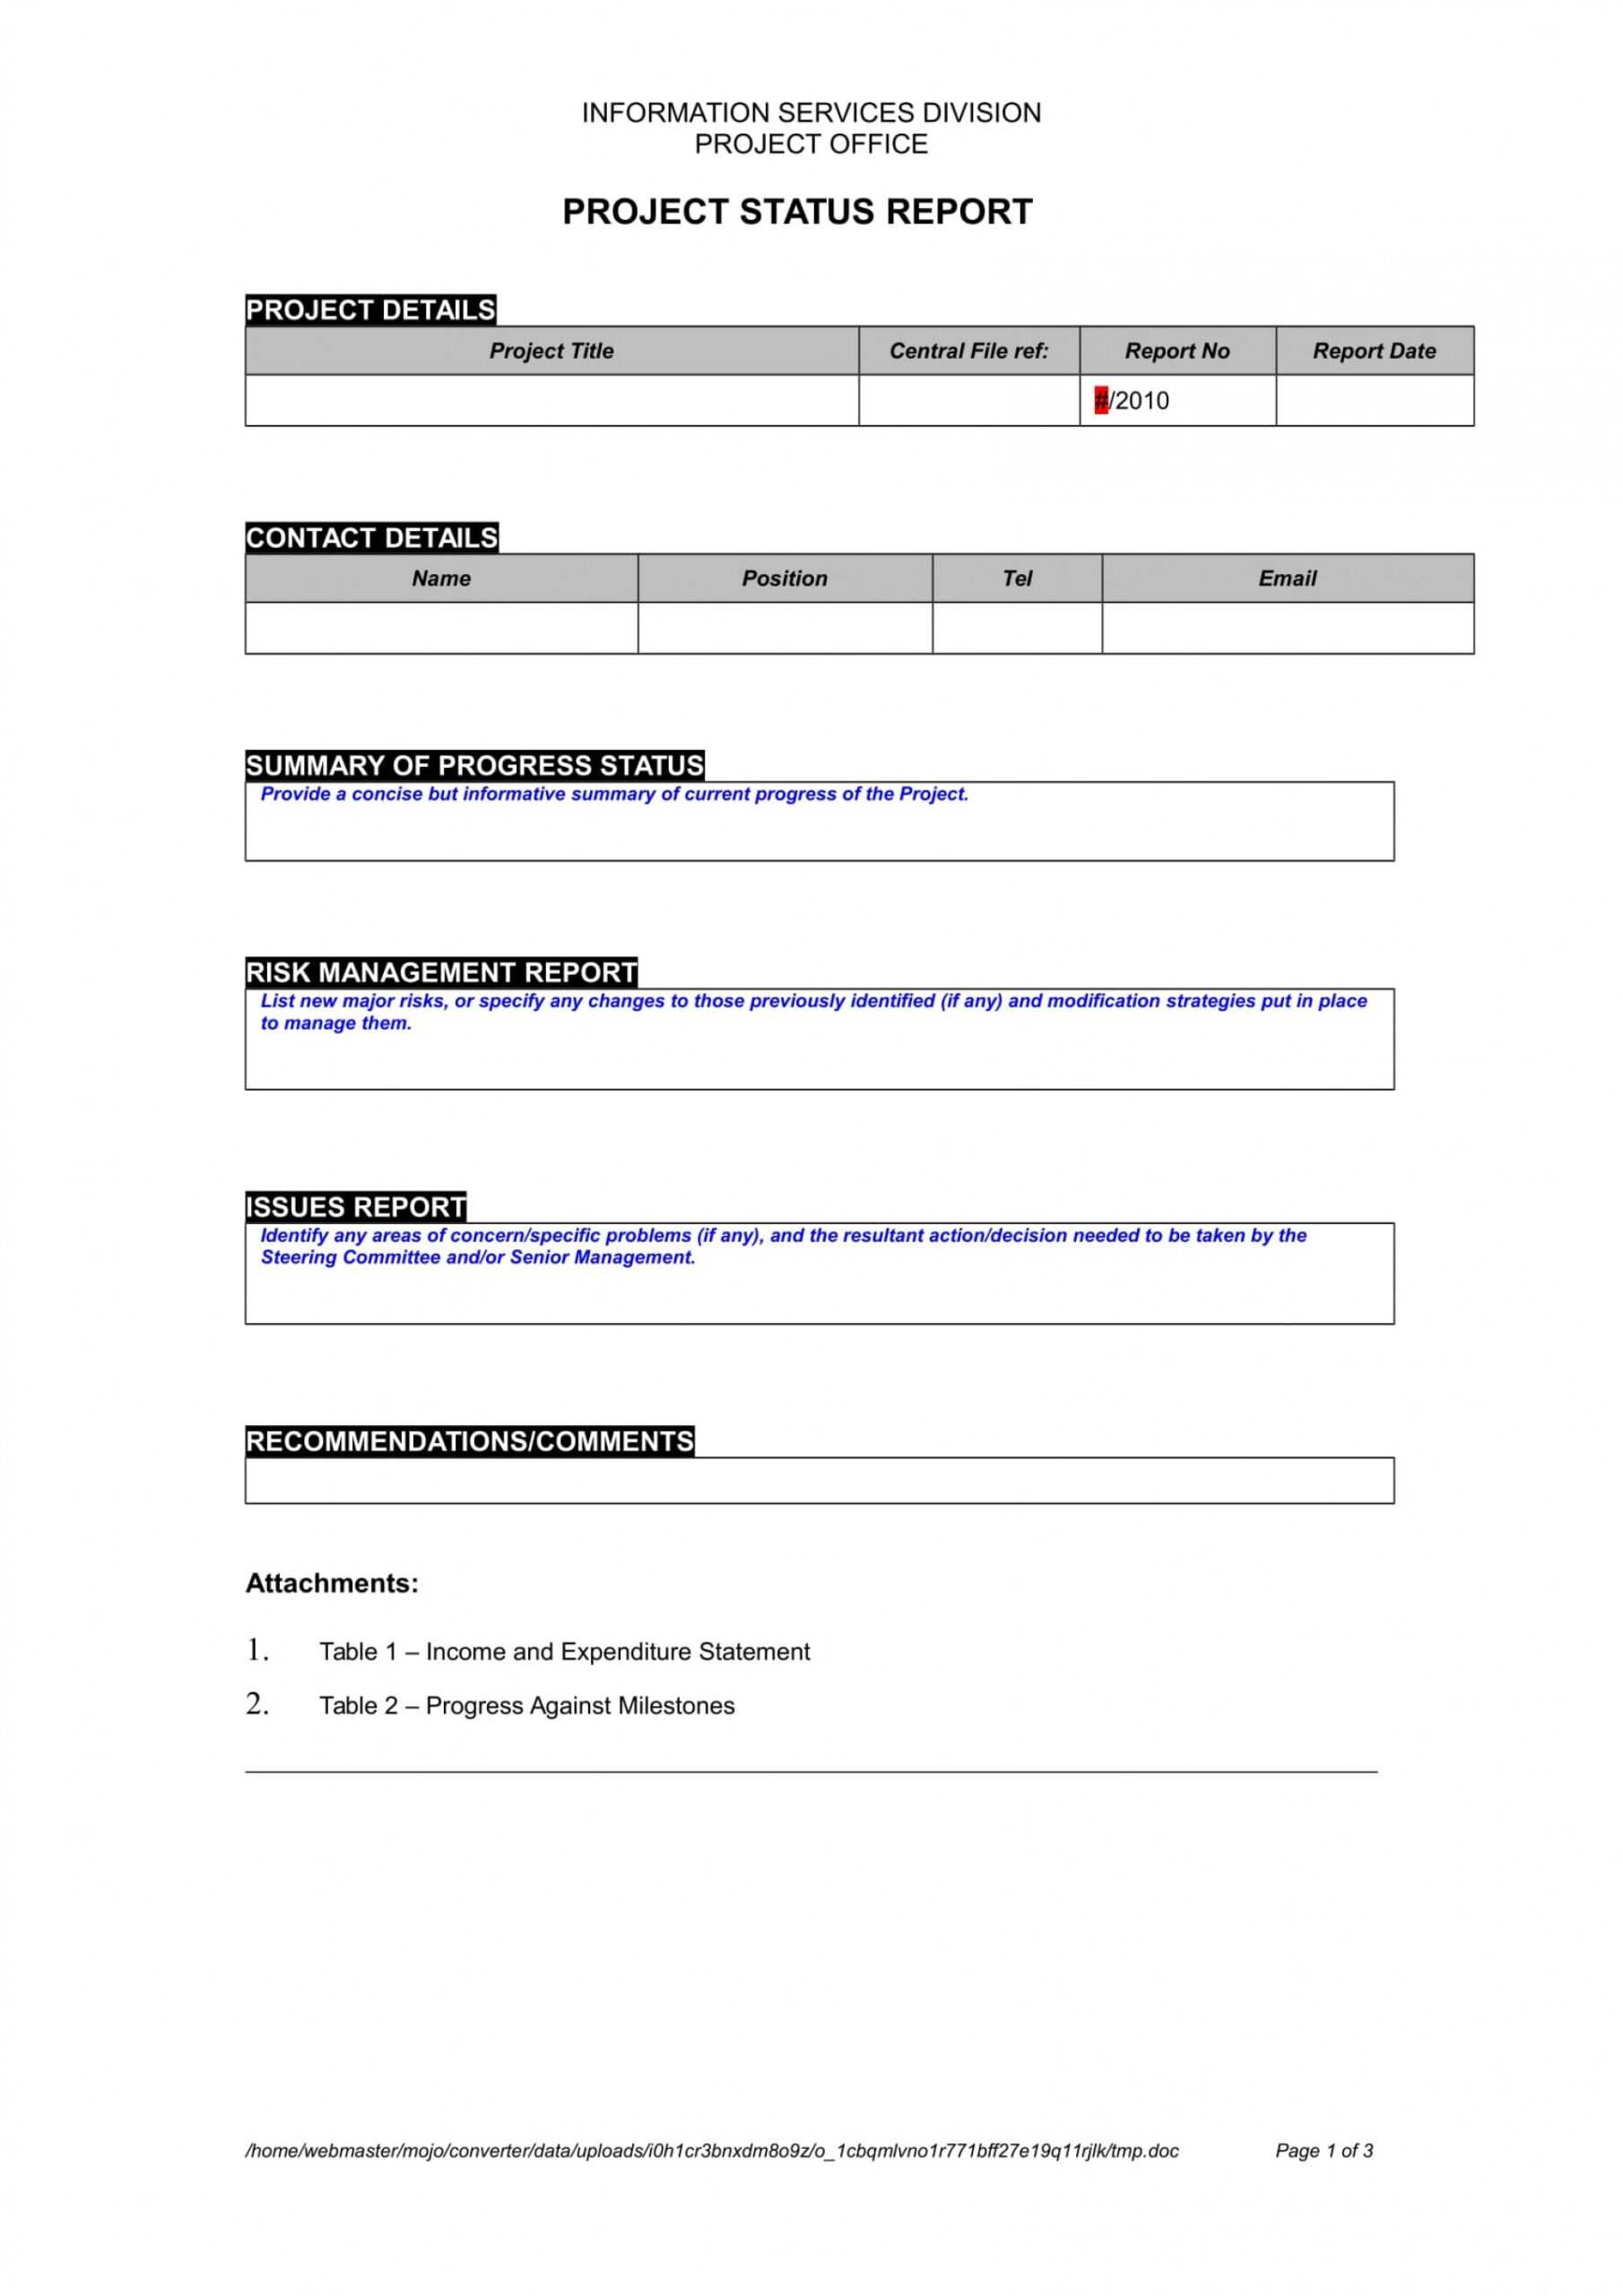 Project Status Report Template Word 2010 - Zohre In Project Status Report Template Word 2010